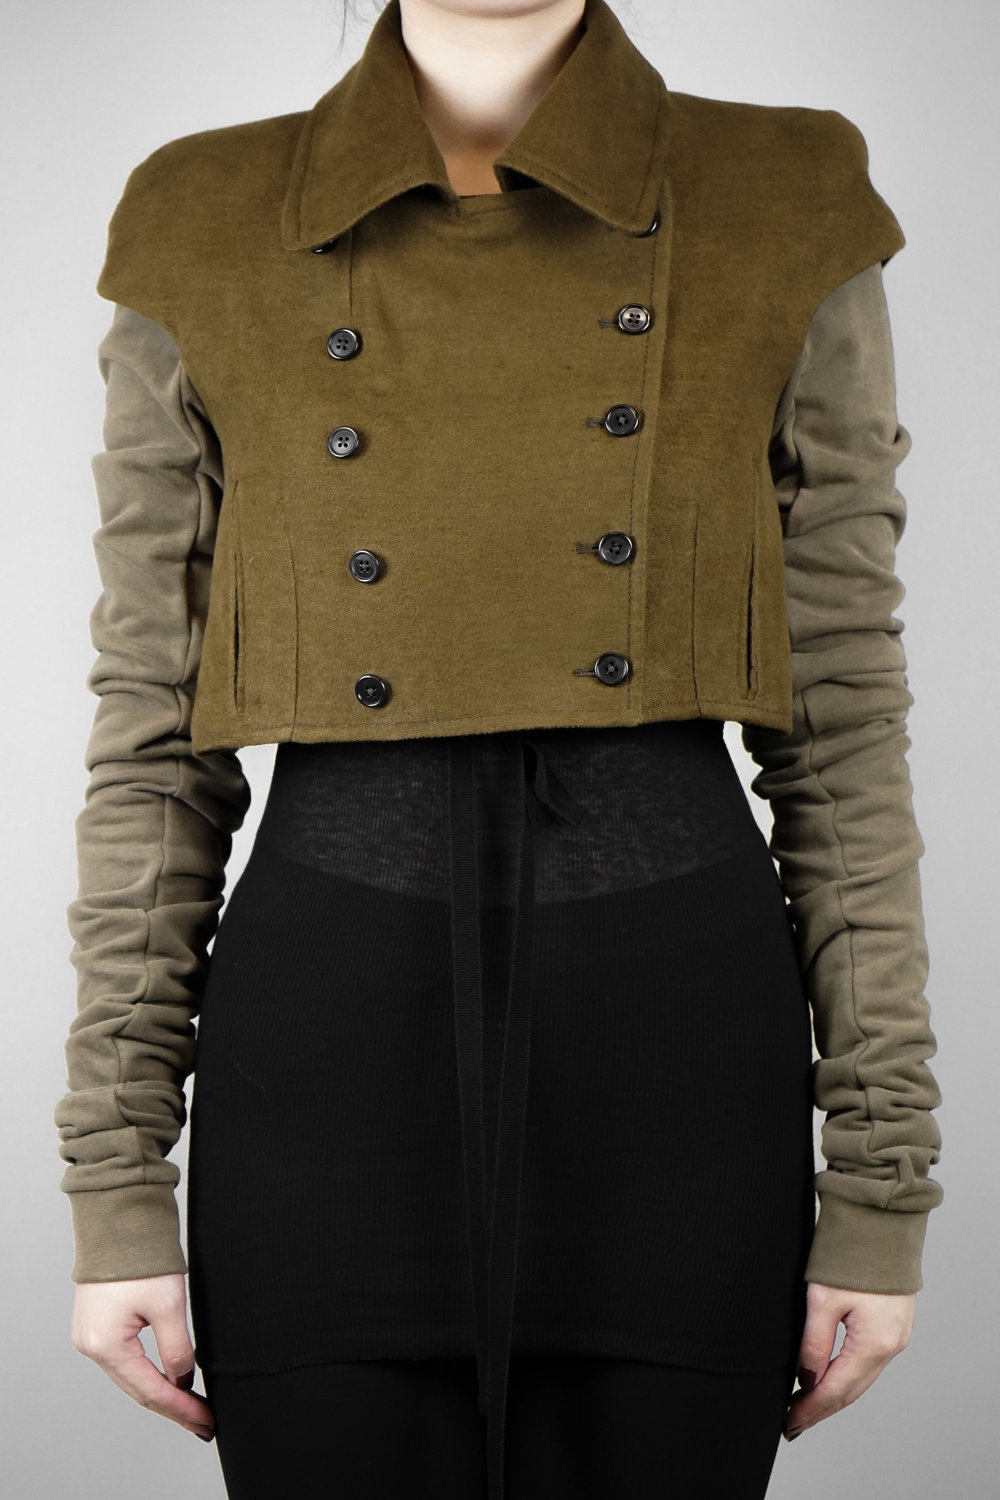 Ann Demeulemeester – Womens – Cropped Coat – Khaki / Brown – Cotton / Linen – Double Breasted – Long Cotton Sleeves